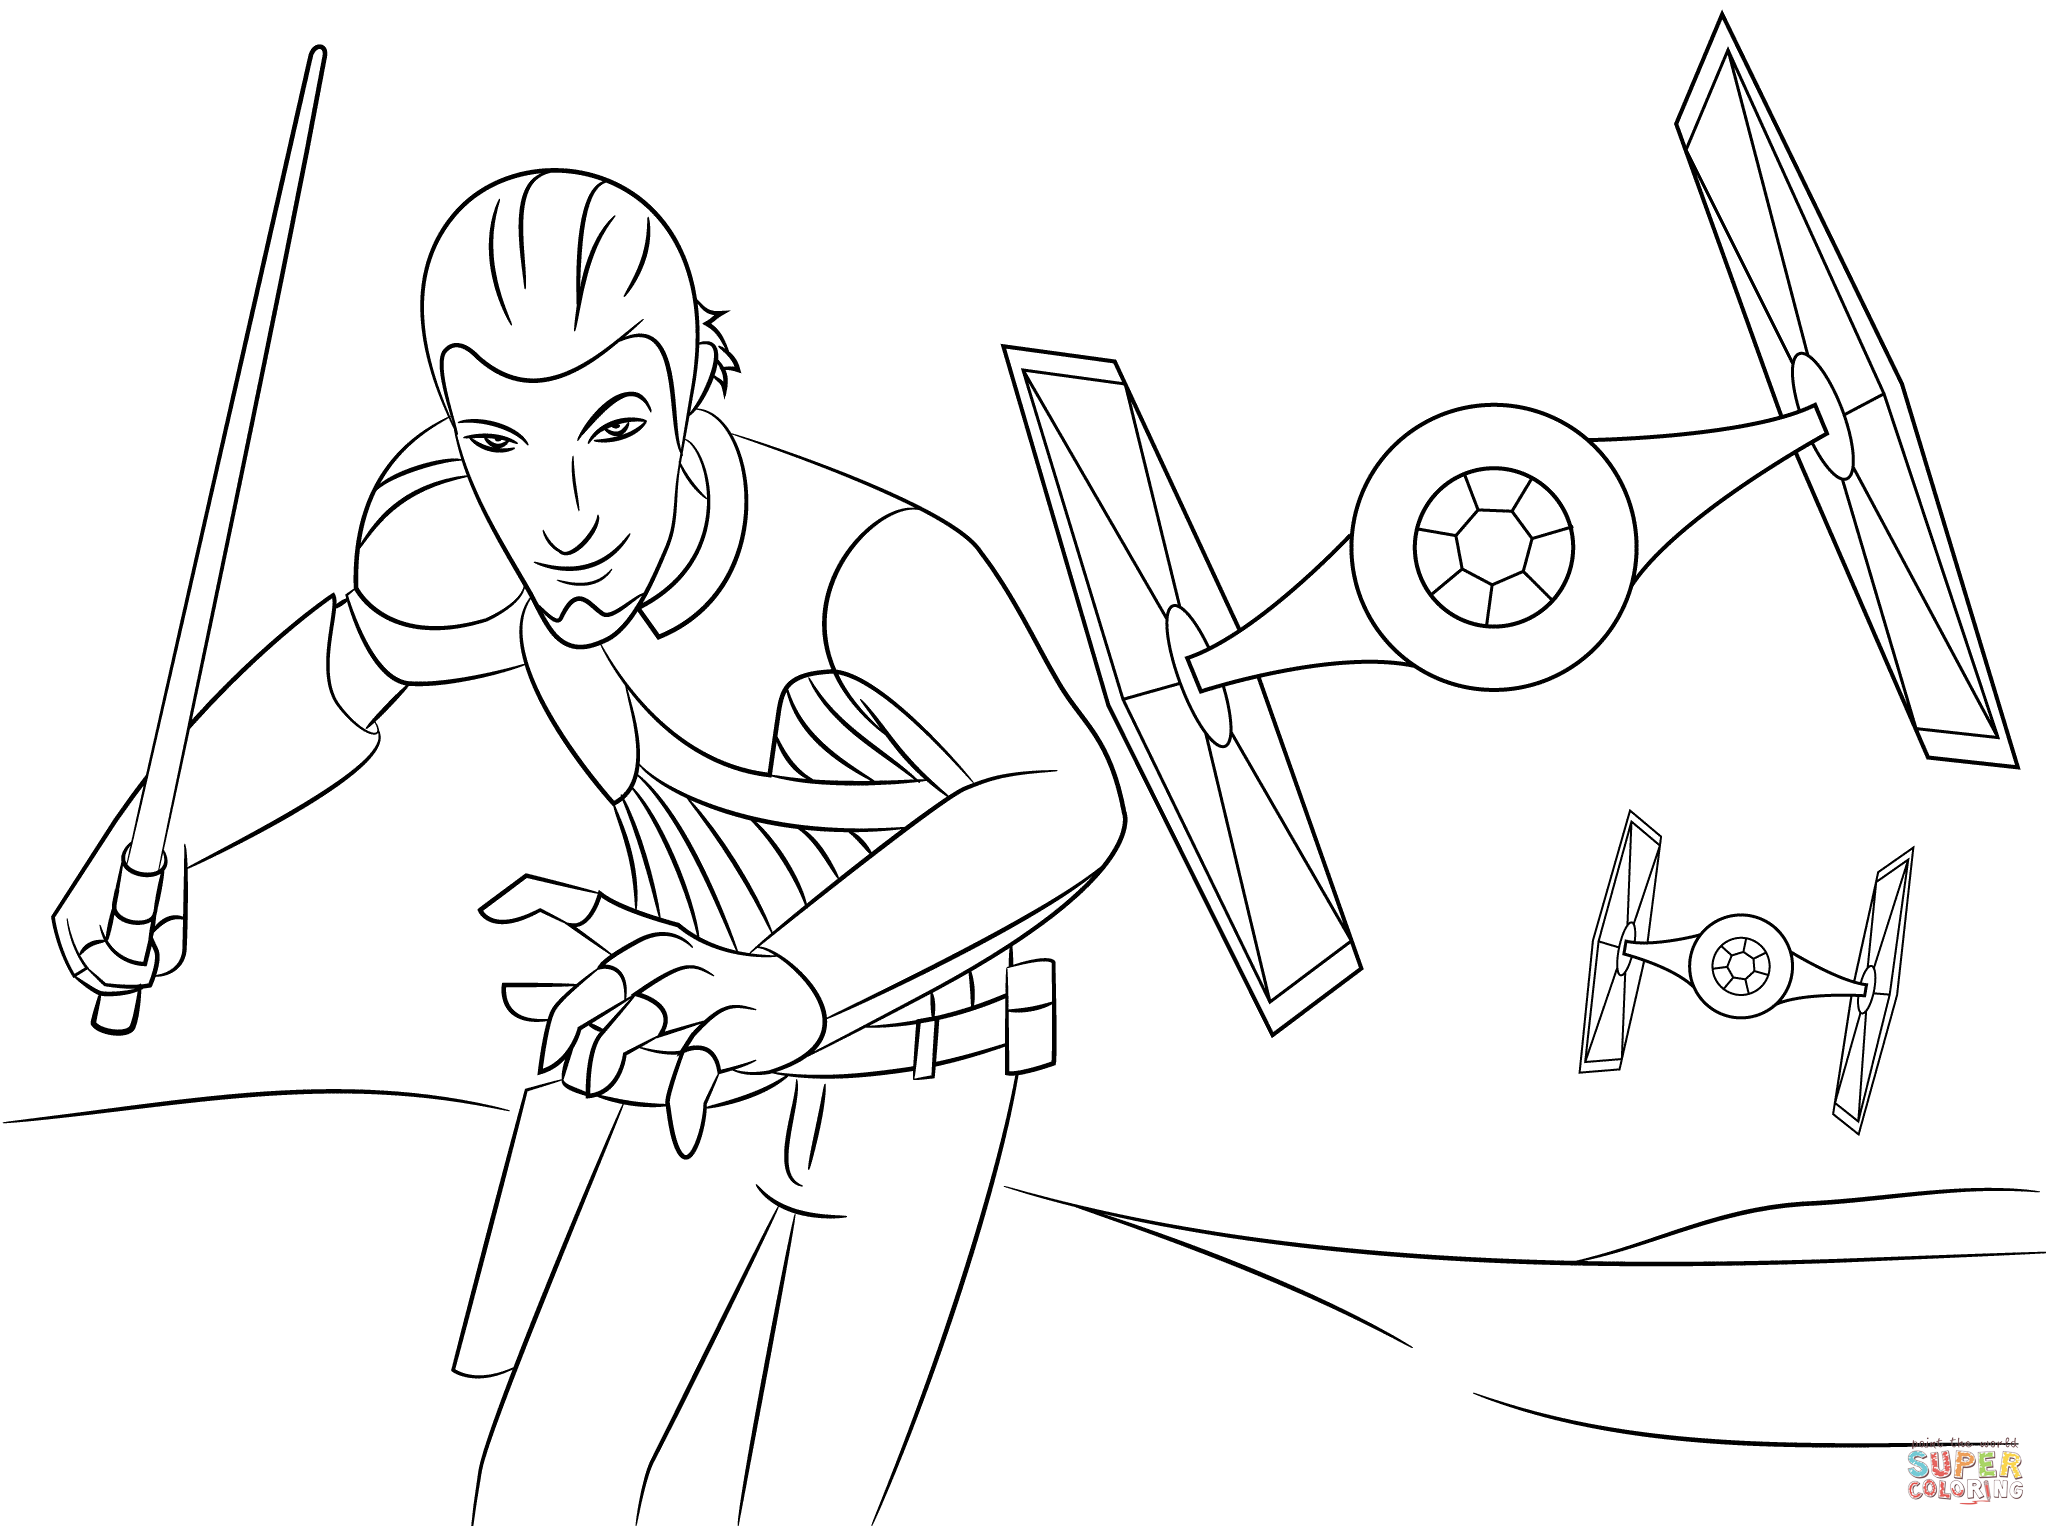 Star Wars Coloring Pages Printable (18 Pictures) - Colorine.net | 6669